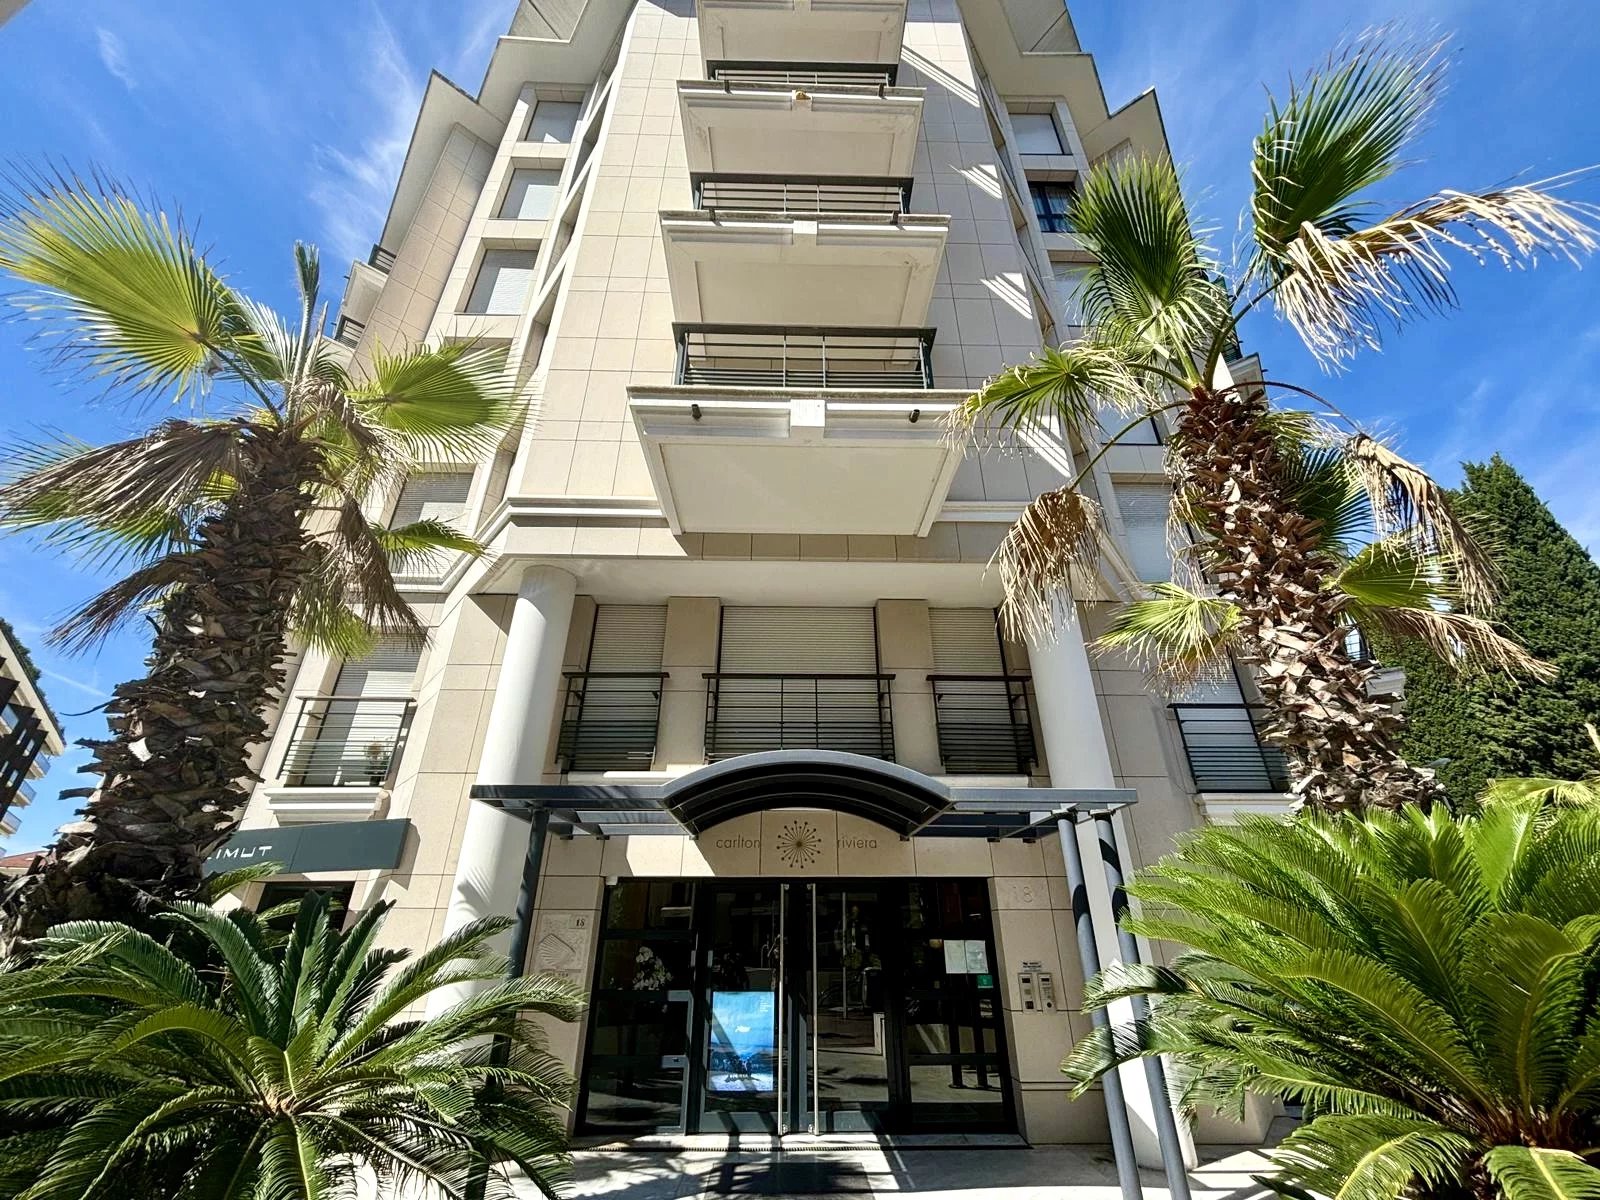 CANNES CARLTON RIVIERA - LUXURIOUS 1 BEDROOM APARTMENT, GARAGE and CELLAR